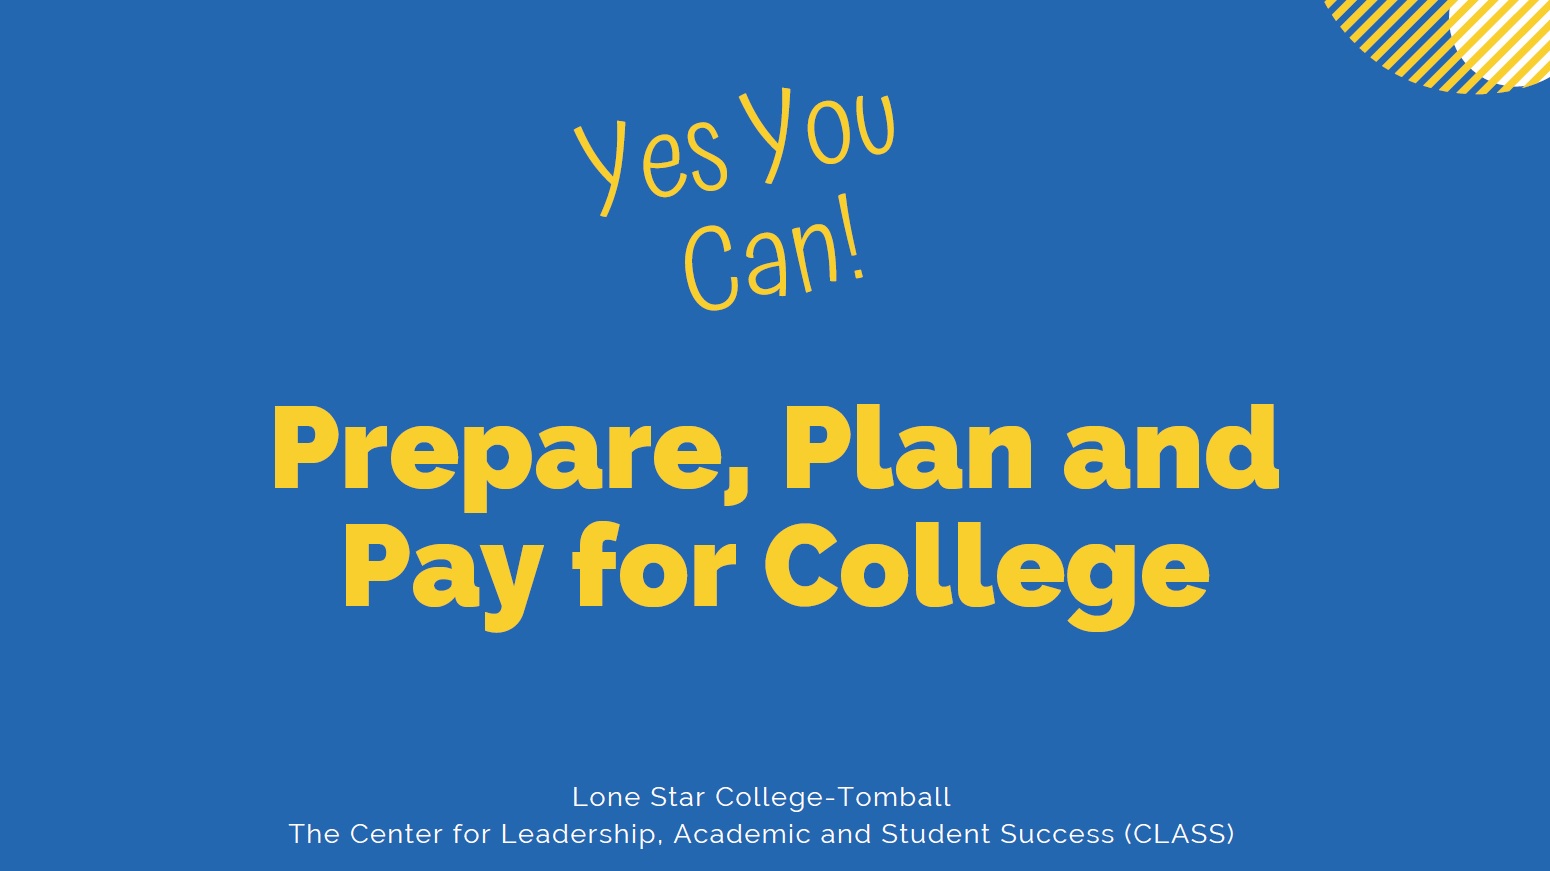 Yes You Can! Prepare, Plan and Pay for College